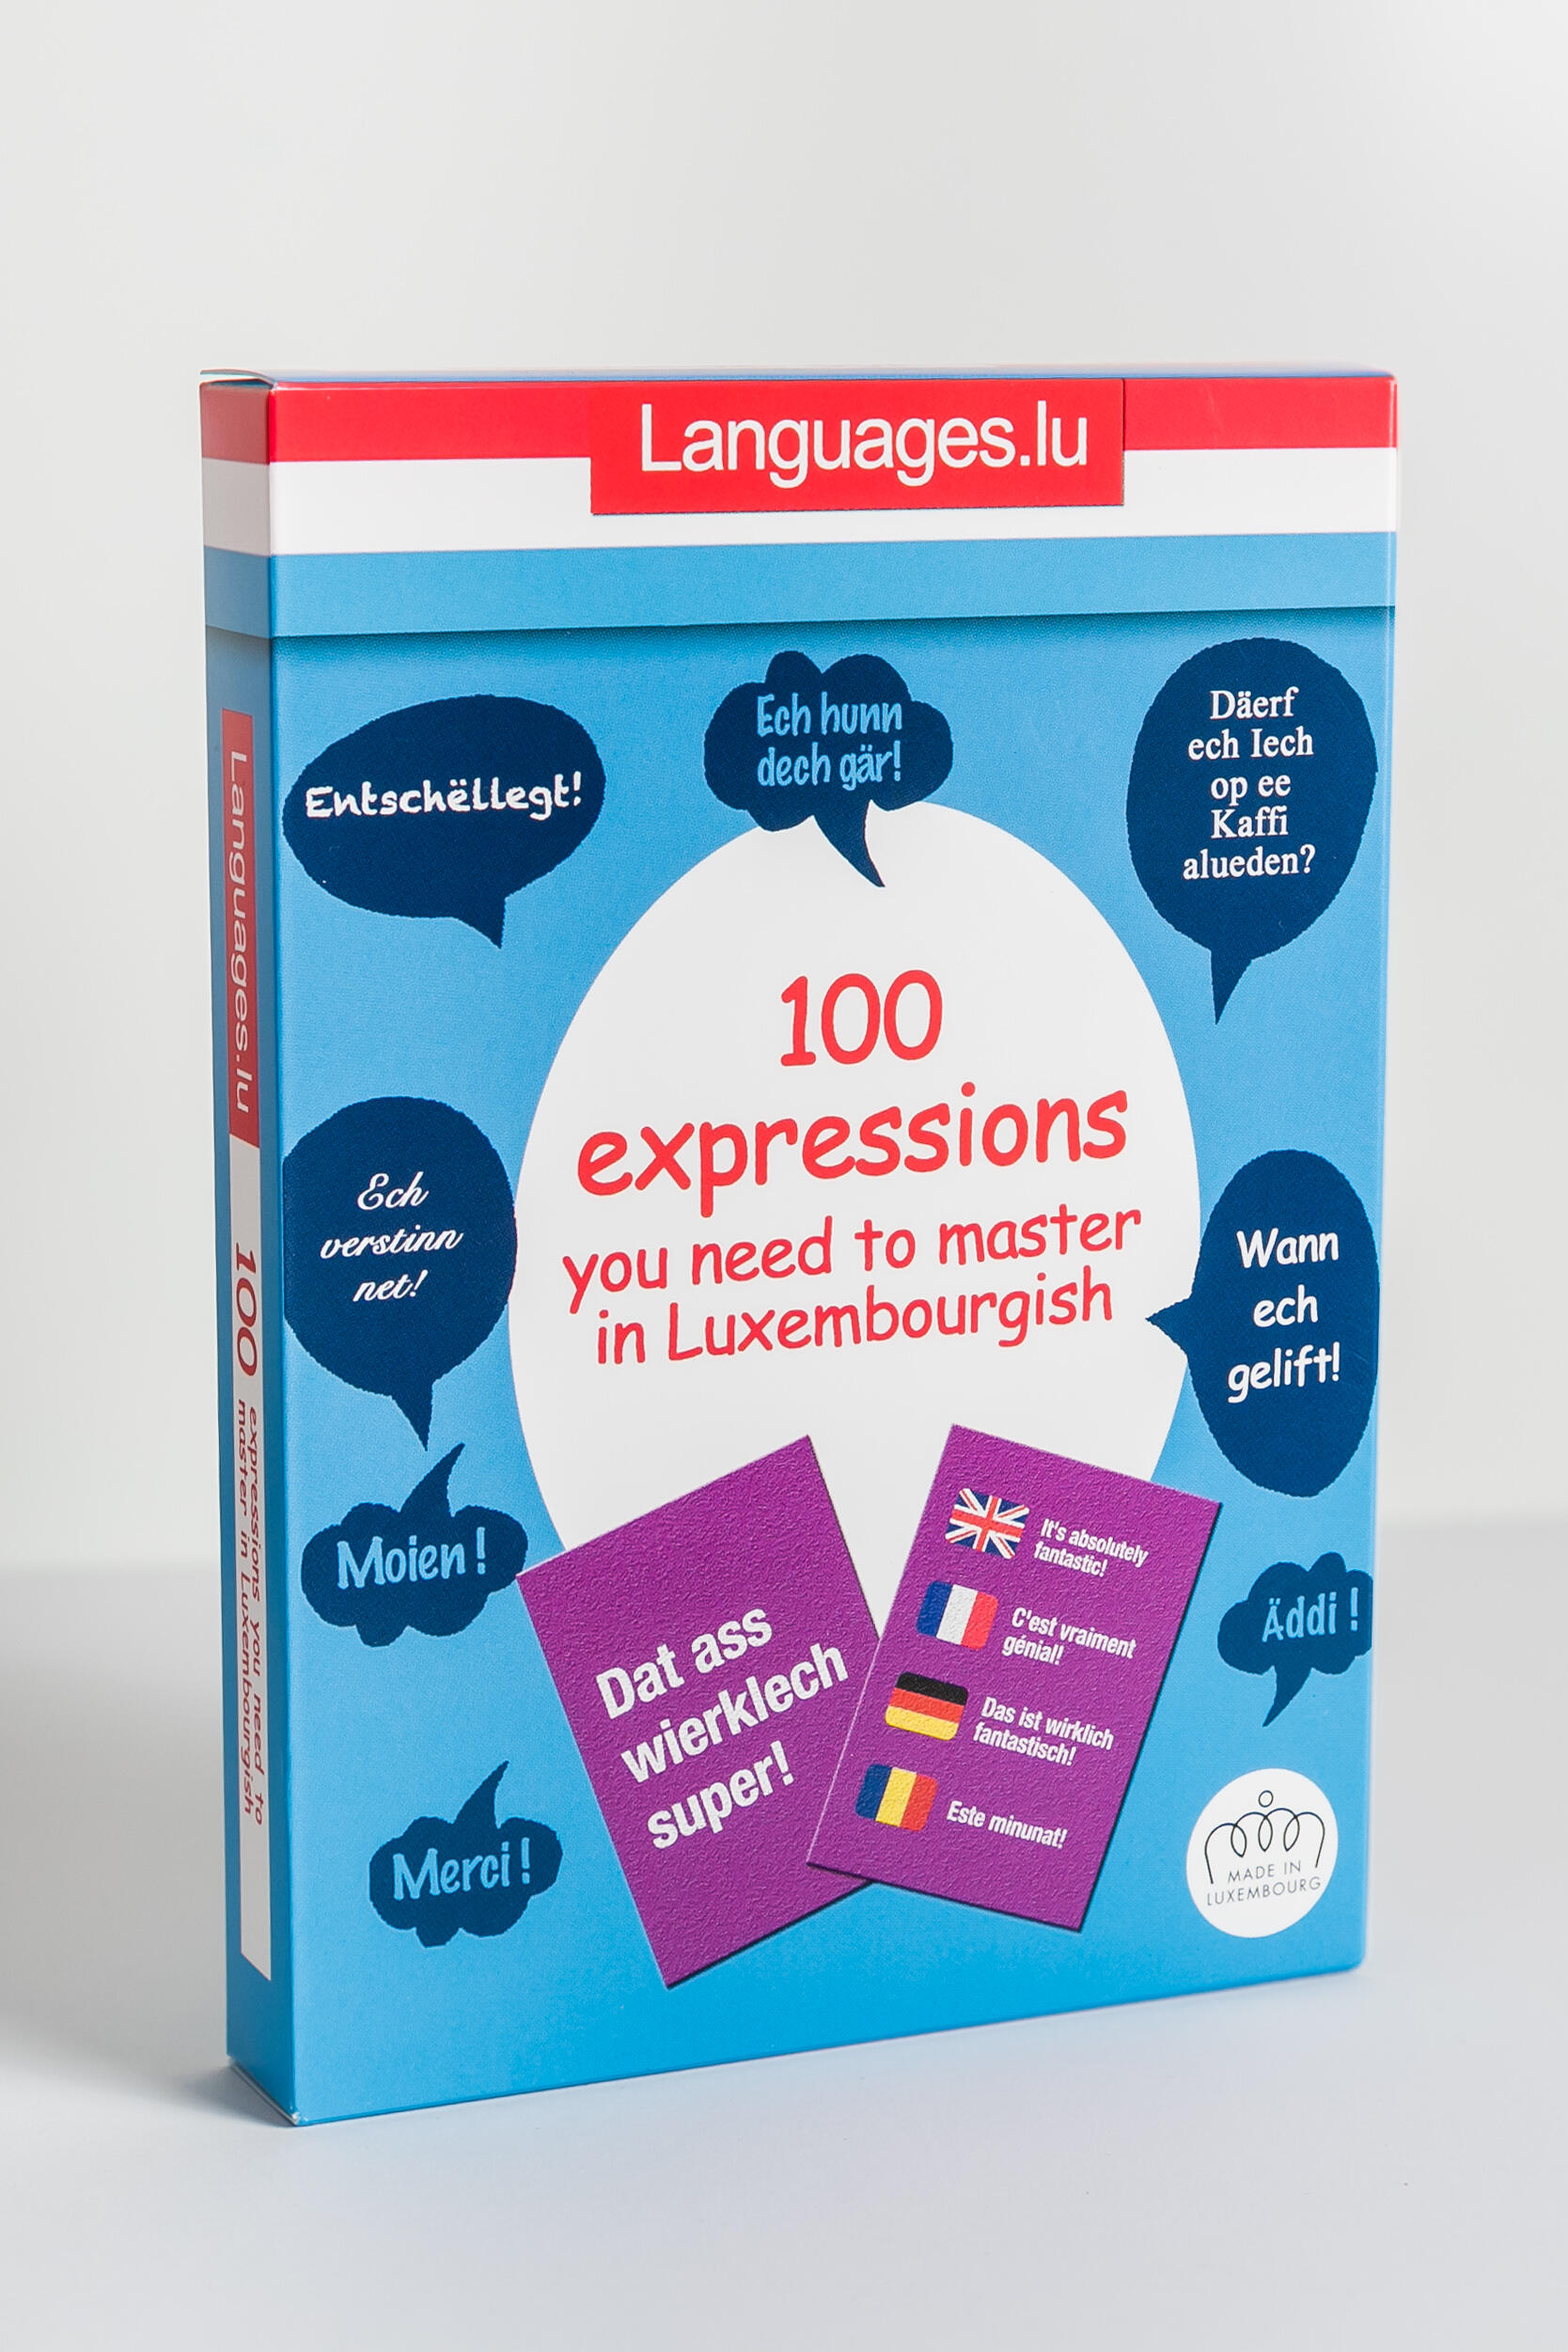 100 expressions you need to master in Luxembourgish